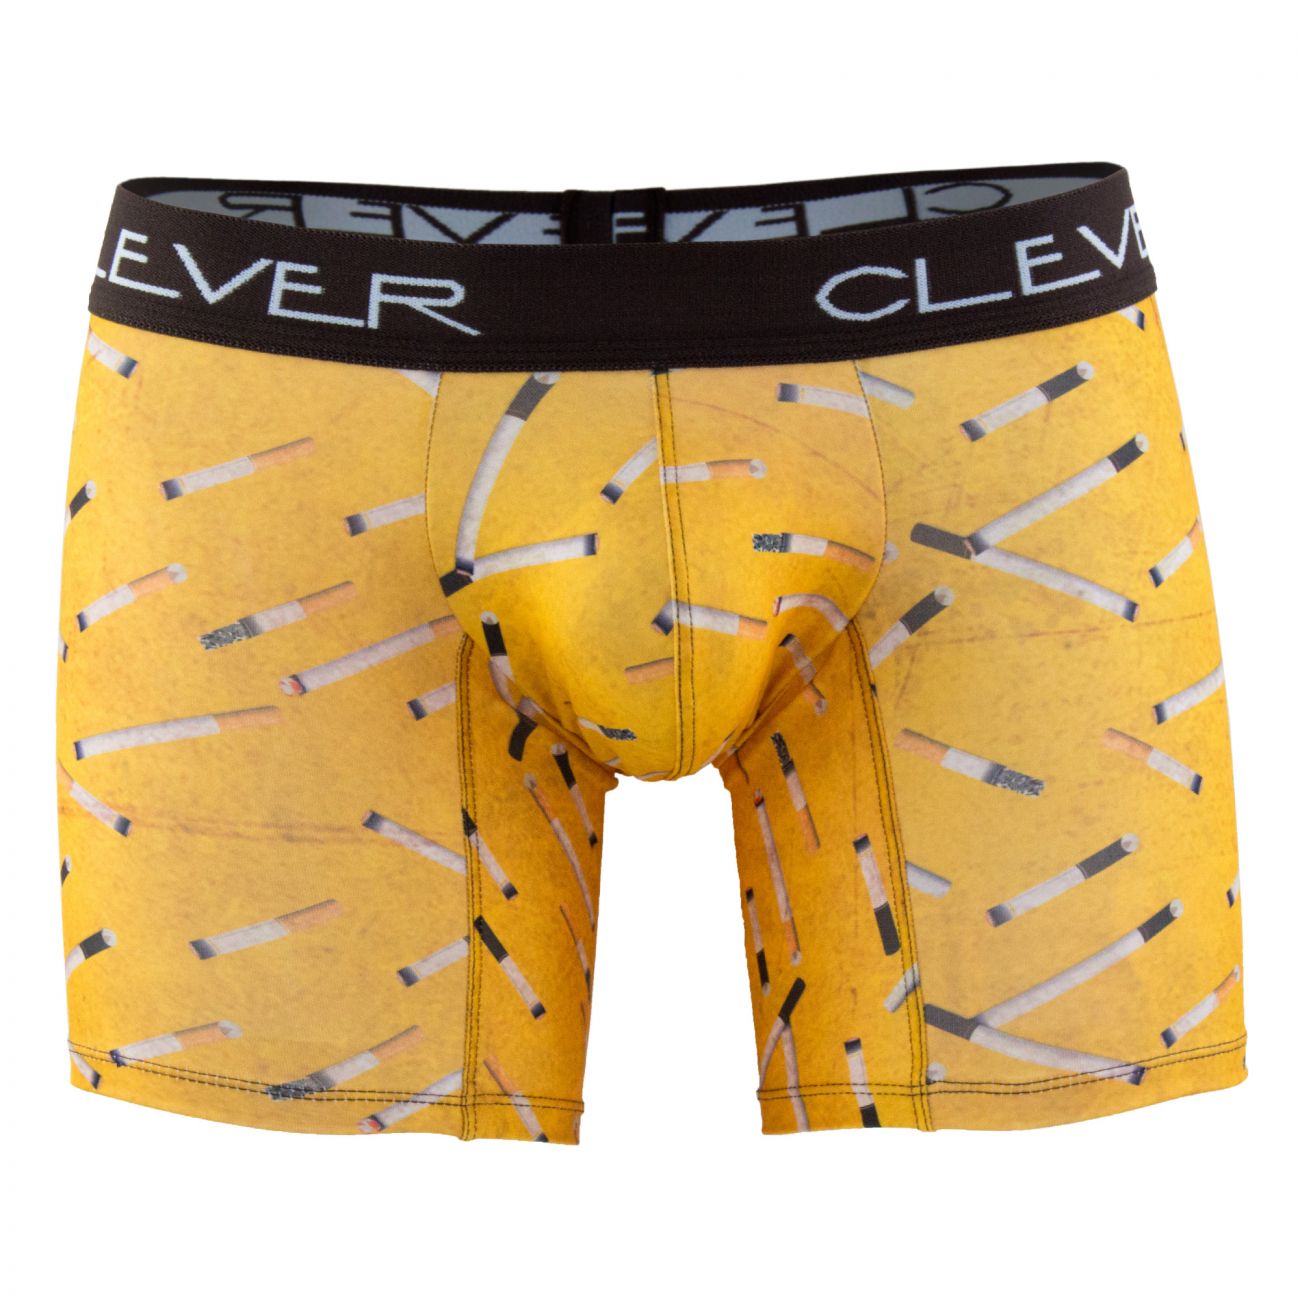 Clever 9099 Limited Edition Long Boxer Briefs Yellow